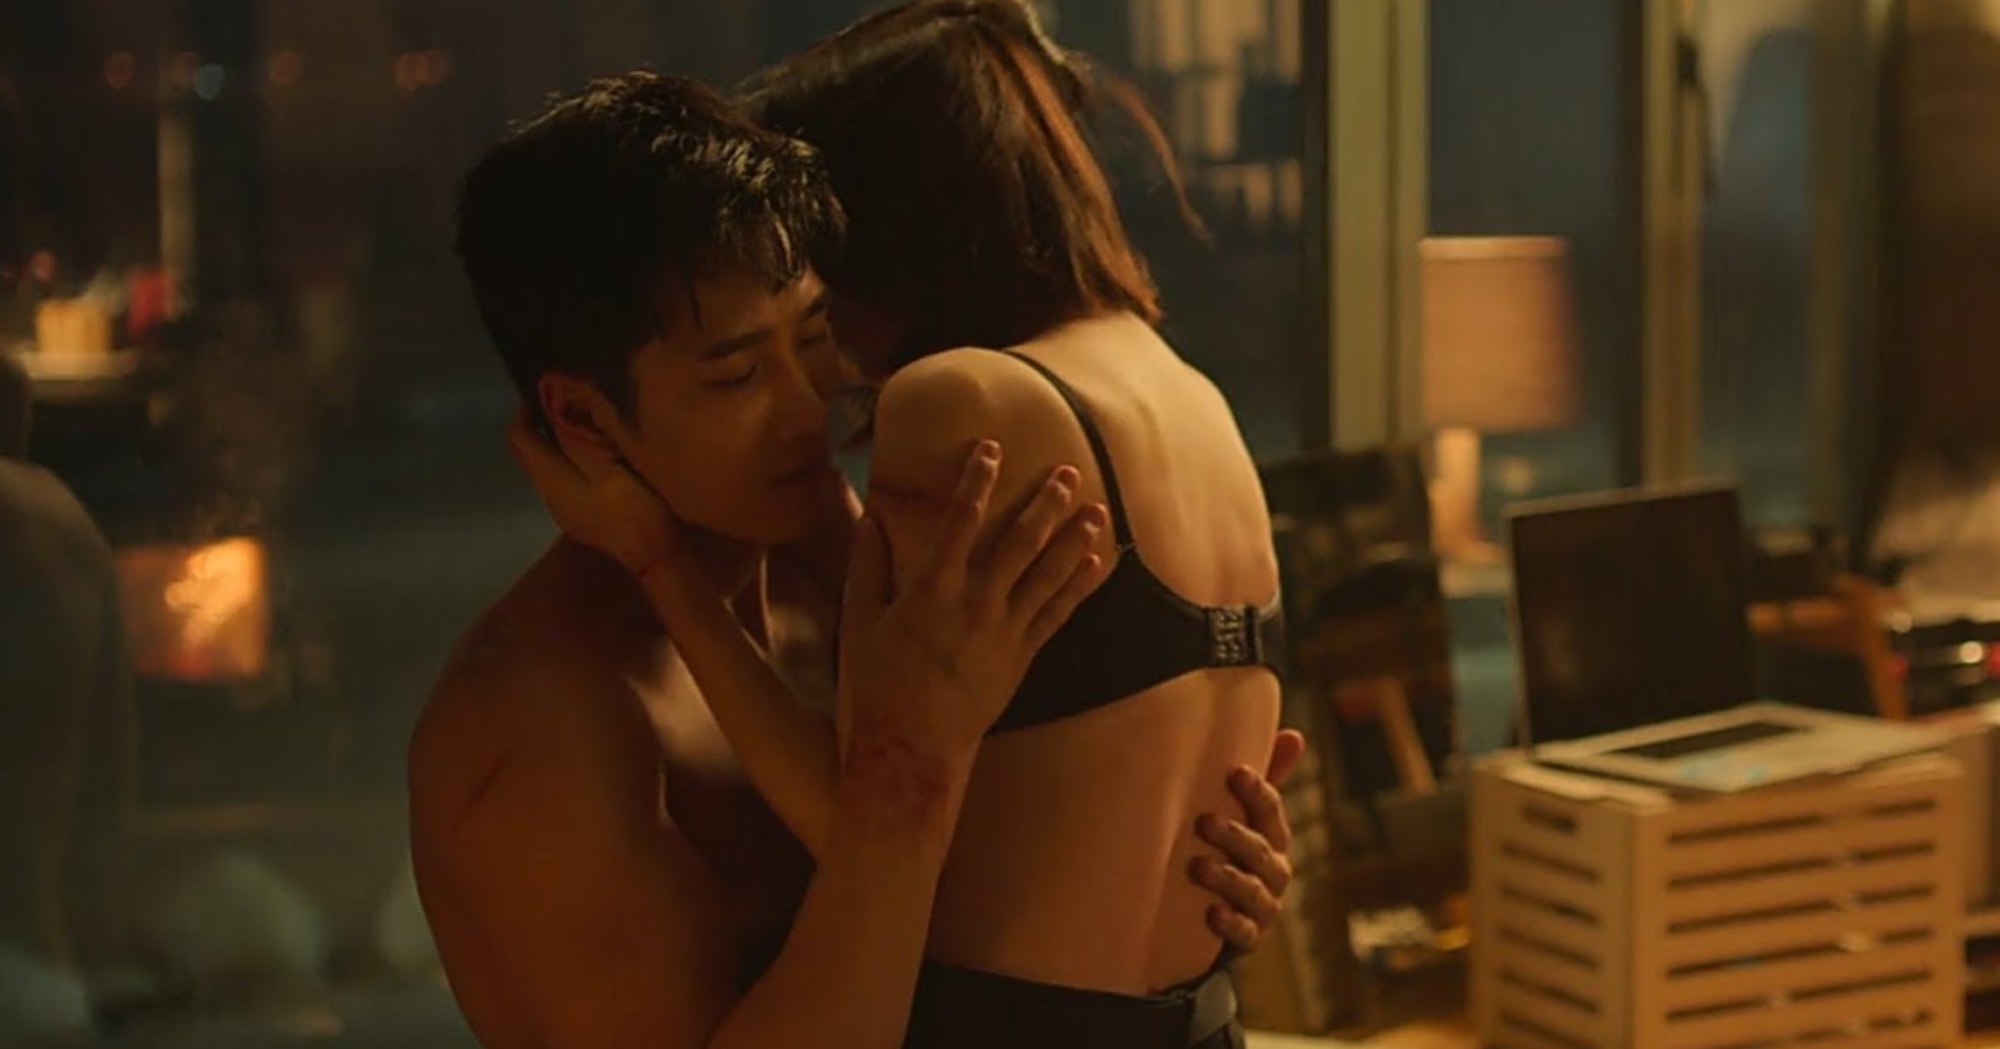 Characters Ji-woo and Pil-do from 'My Name' K-drama sex scene with no shirts on.